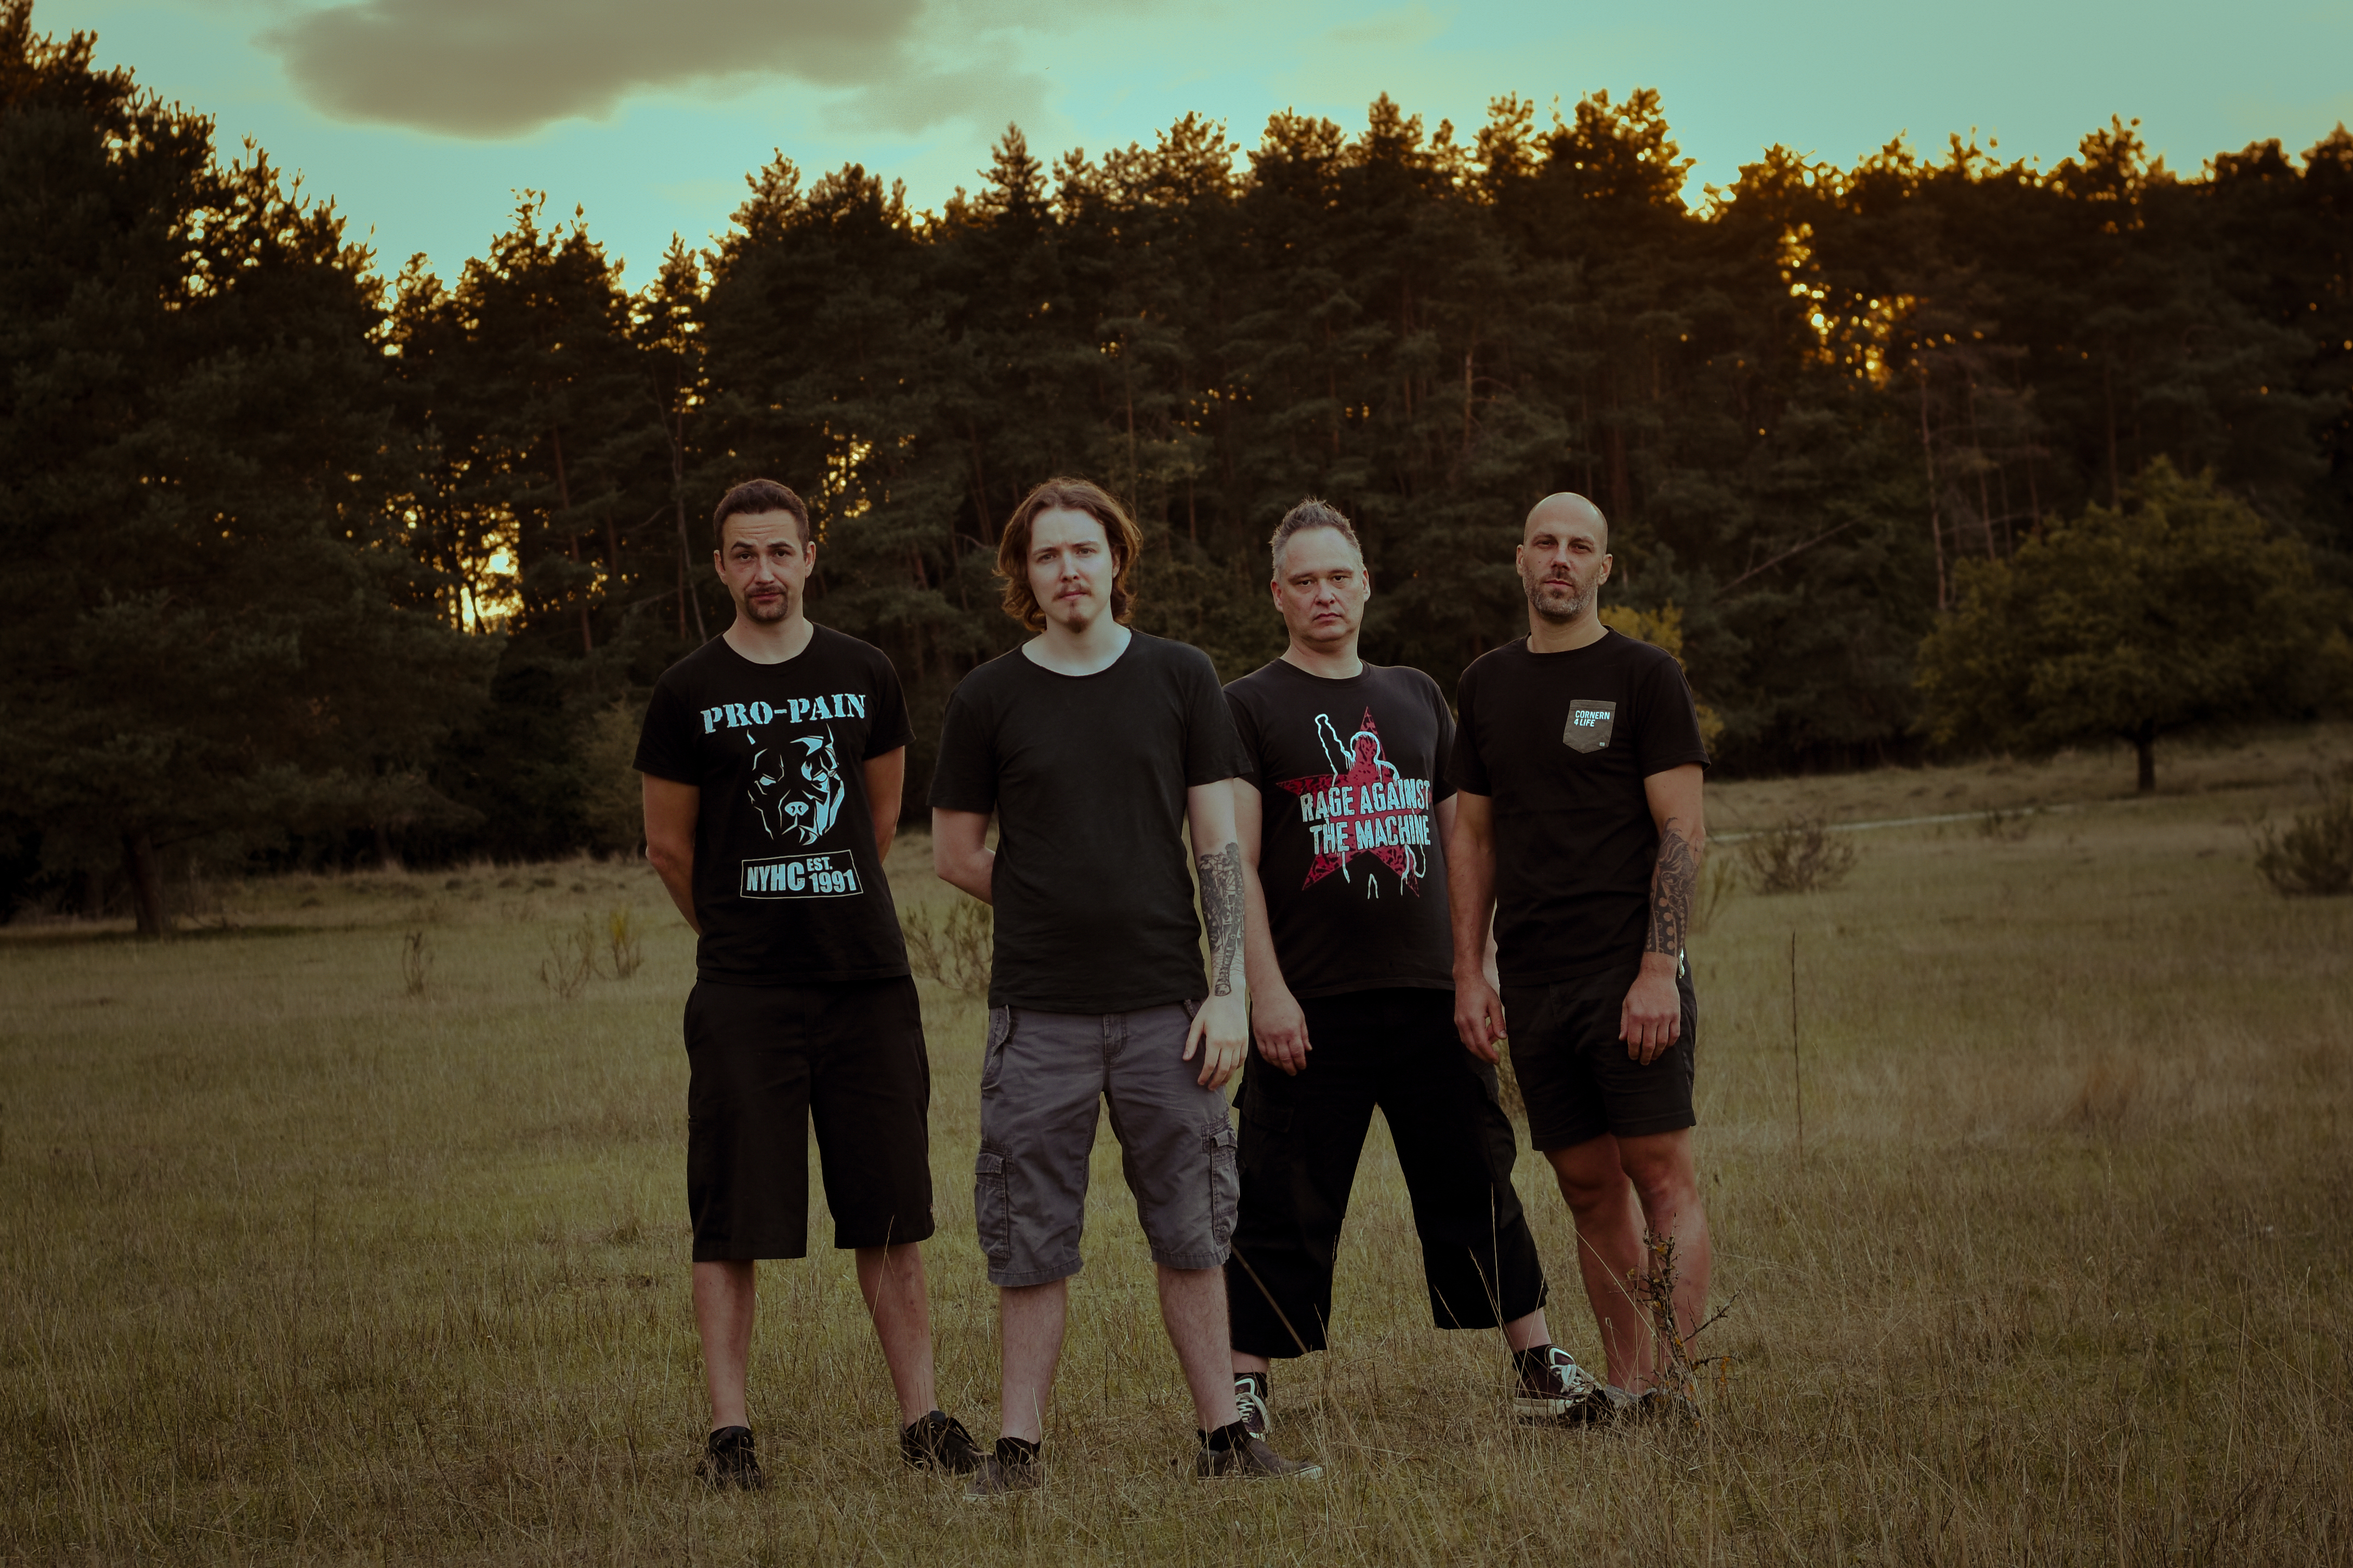 Karmament - The Band on a field in front of a forest with a slightly tilted camera angle